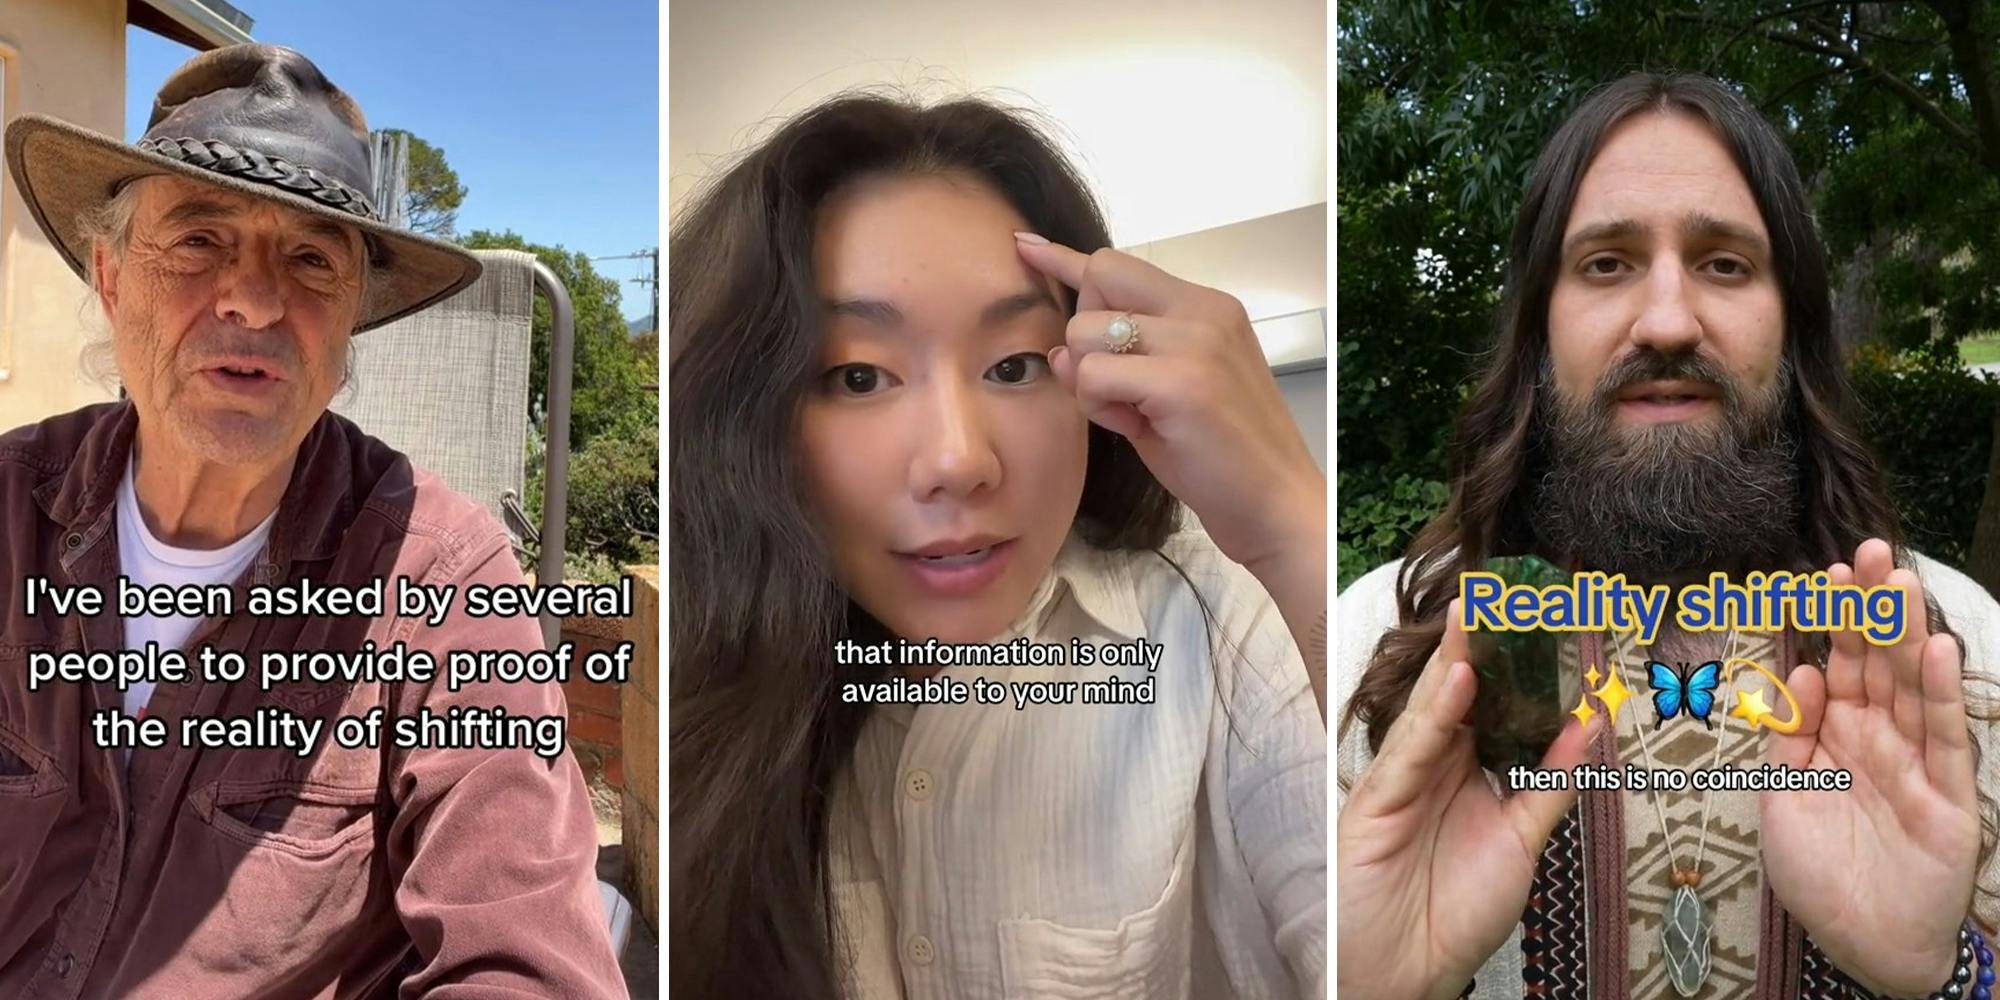 What is 'reality shifting' on TikTok?